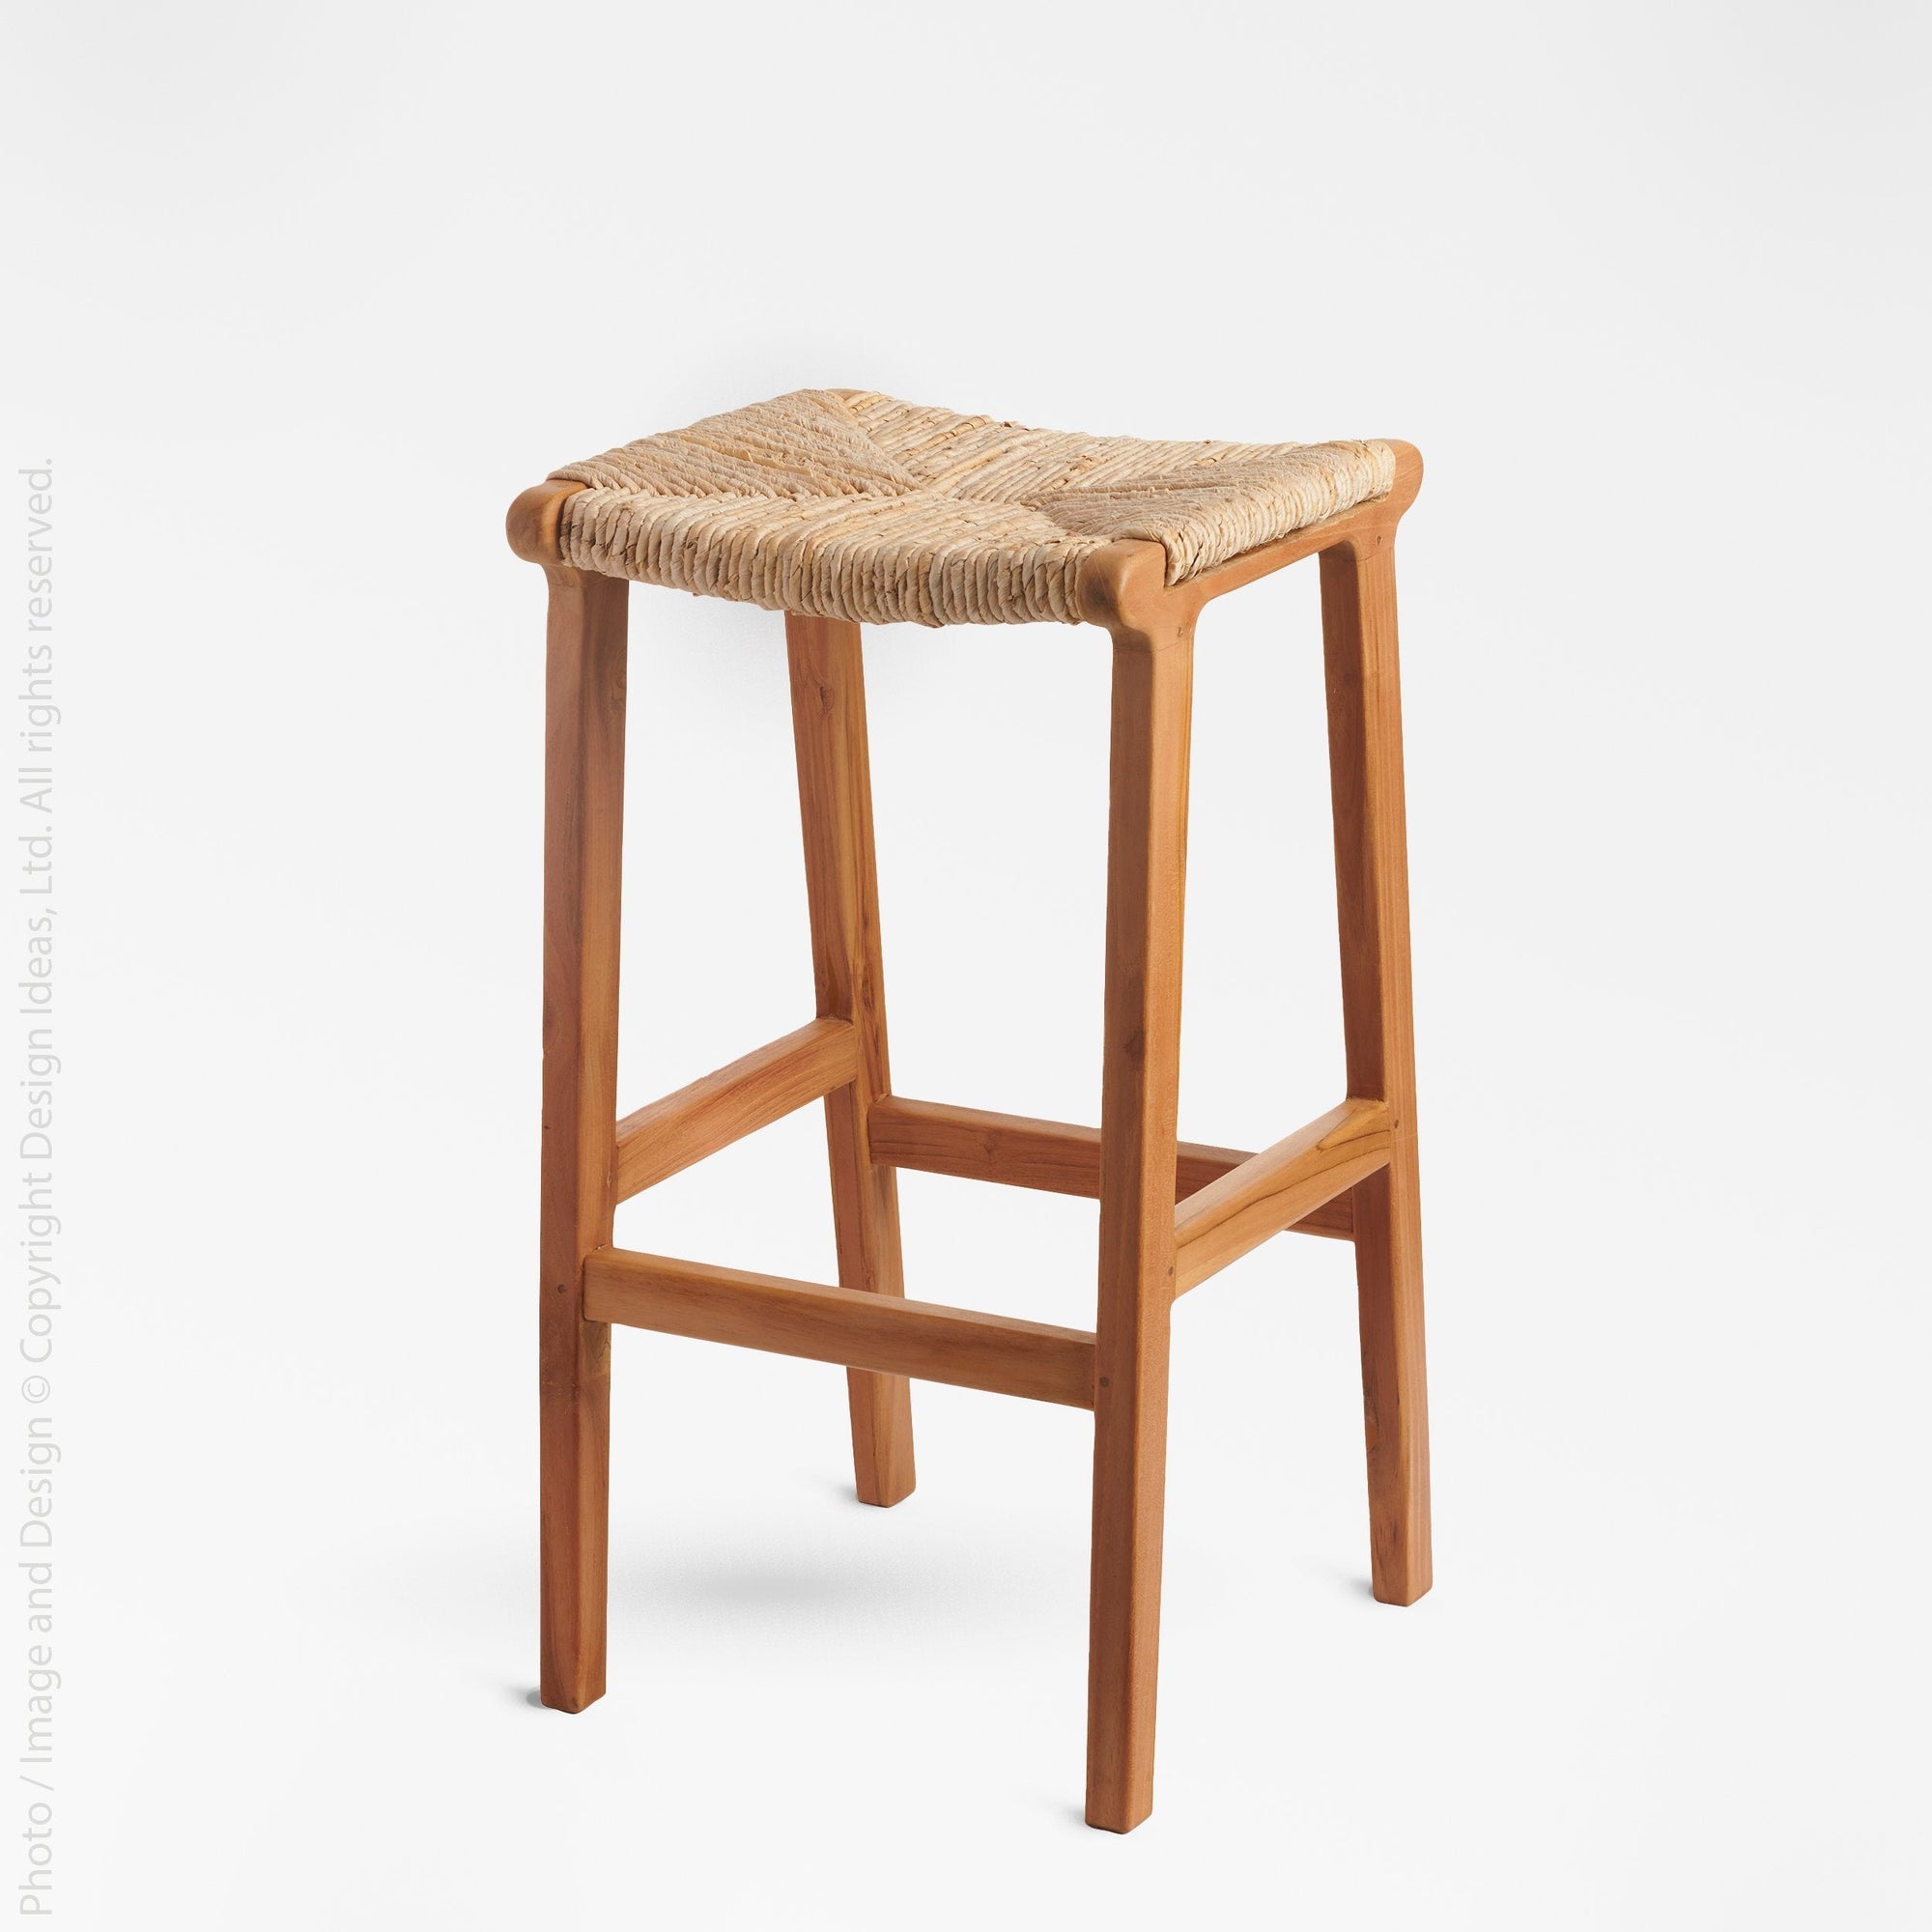 Visby Banana Tree Bark Bar Stool - Sand Color | Image 1 | From the Visby Collection | Skillfully assembled with natural banana tree bark for long lasting use | Available in natural color | texxture home